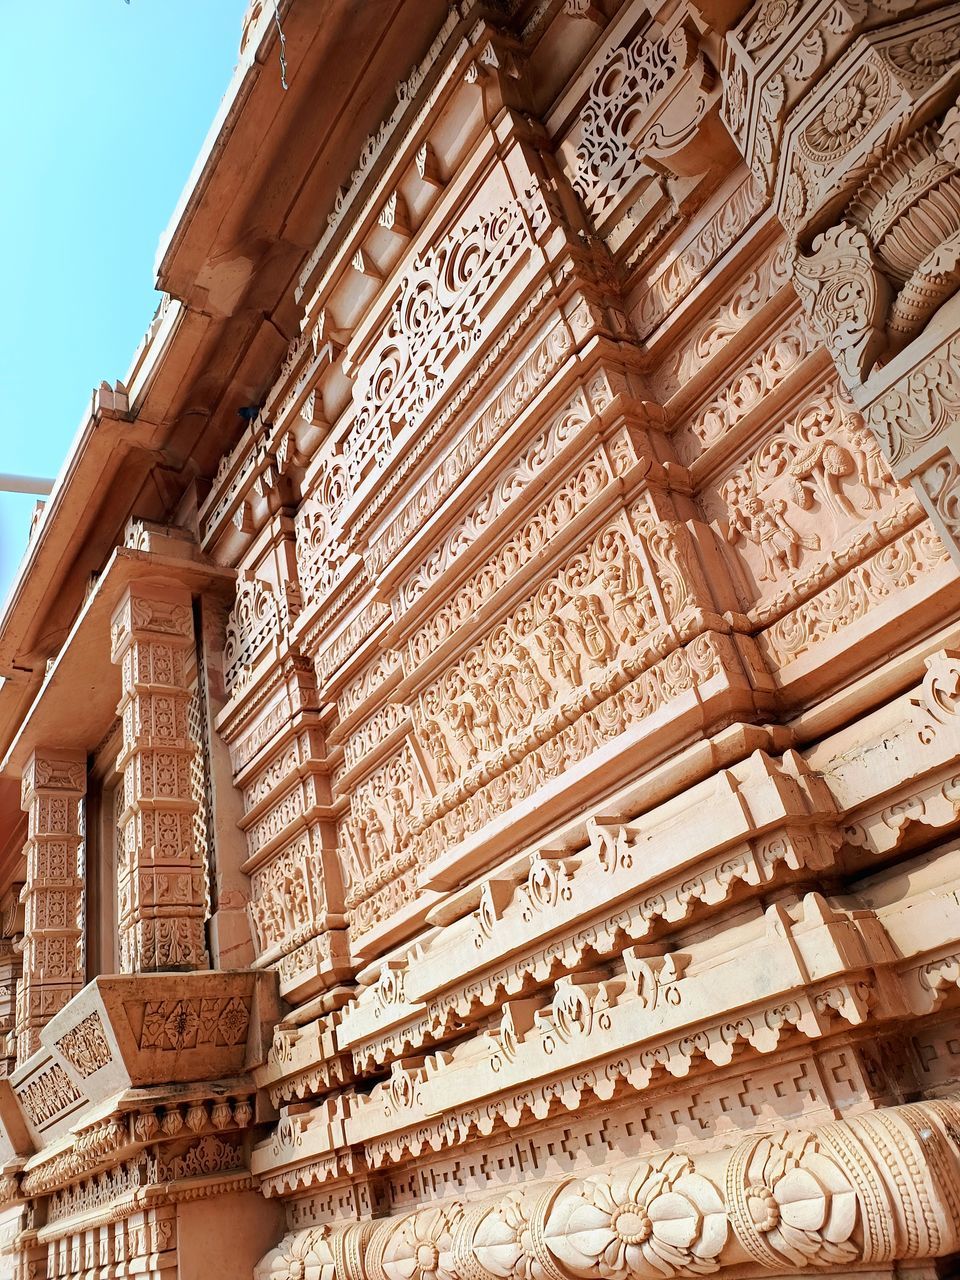 architecture, built structure, building exterior, low angle view, building, history, the past, no people, travel destinations, craft, facade, religion, wood, day, temple - building, temple, pattern, ancient, travel, tourism, wall, ornate, belief, outdoors, sky, brick, tradition, nature, place of worship, architectural feature, mansion, roof, spirituality